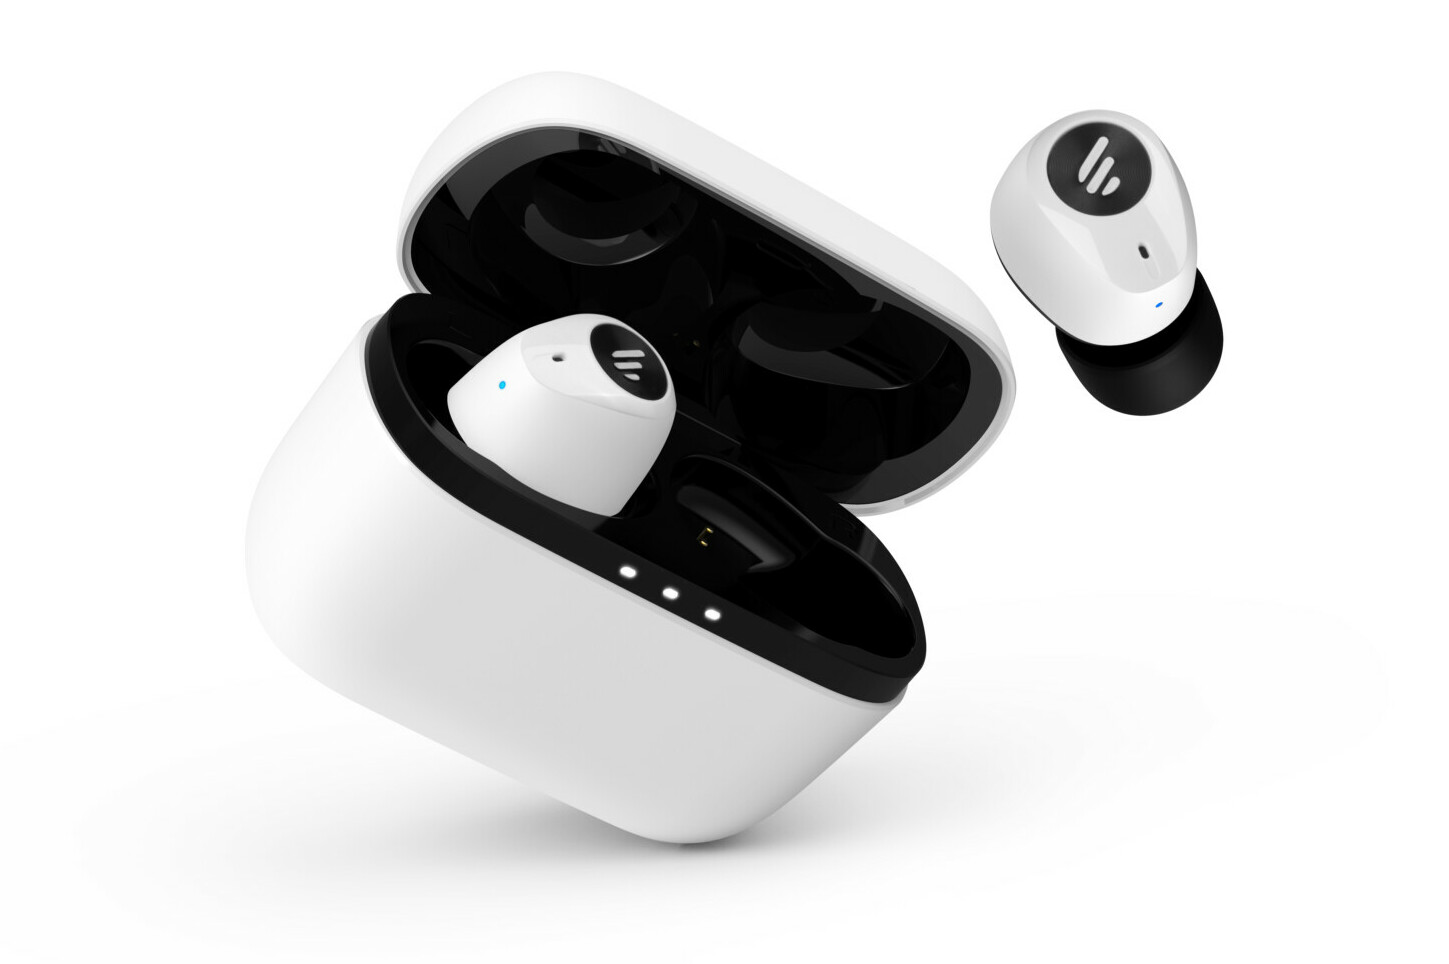 Edifier TWS2 in white product image with one earbud floating above the charging case while the other is inserted.